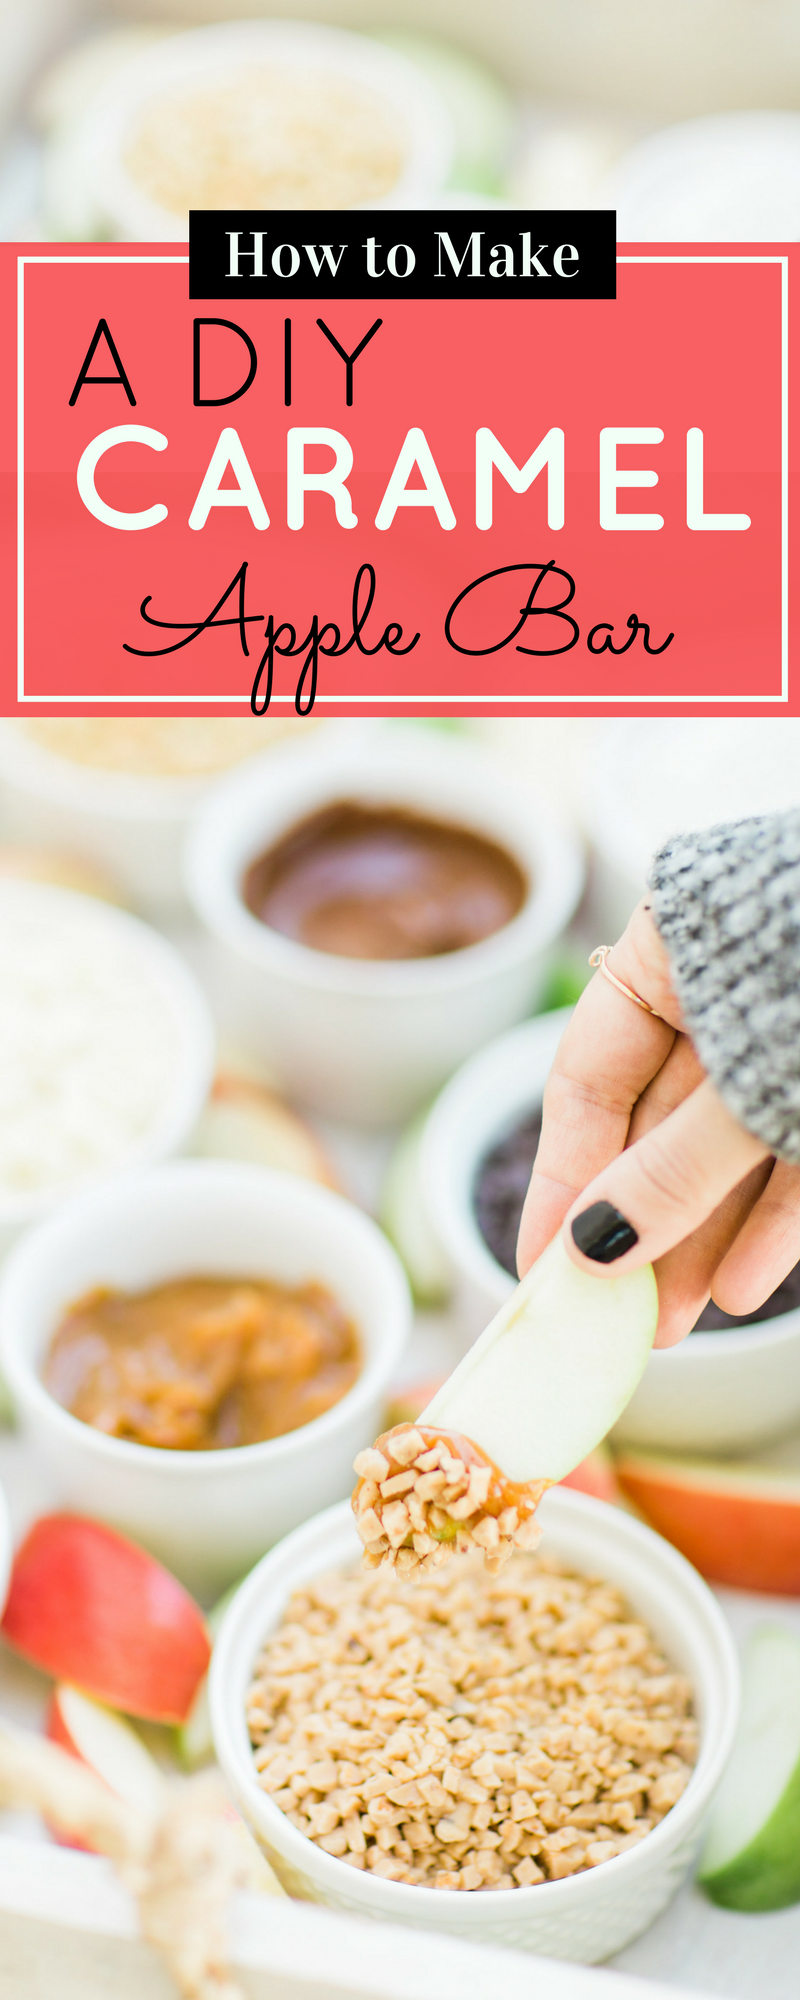 A DIY caramel apple pie bar is the kind of easy dessert station everyone will love. This set-up is delicious, nostalgic, and so much fun. | glitterinc.com | @glitterinc